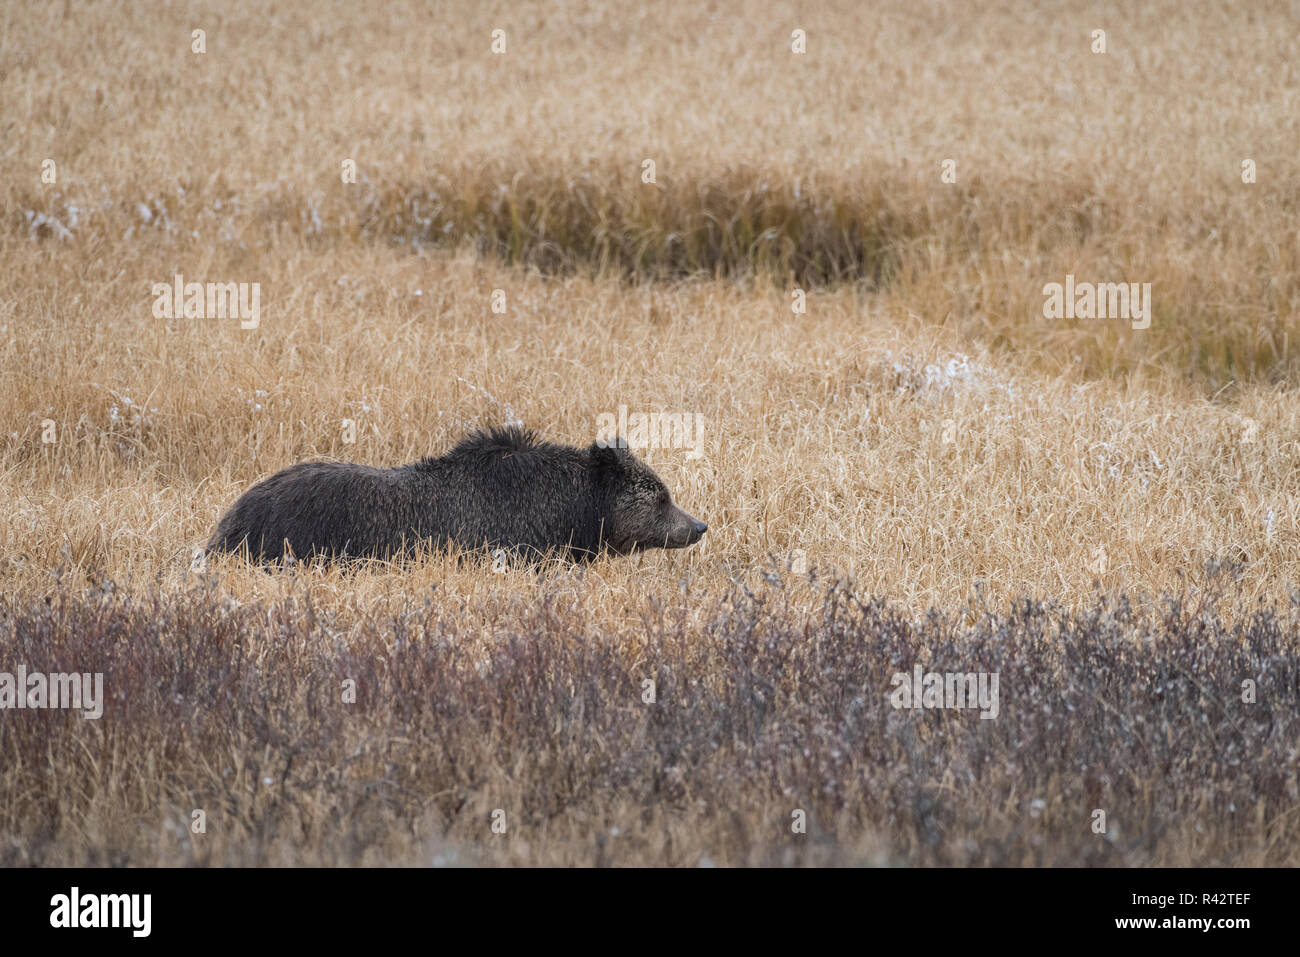 Grizzly bear in Yellowstone National Park, North America Stock Photo